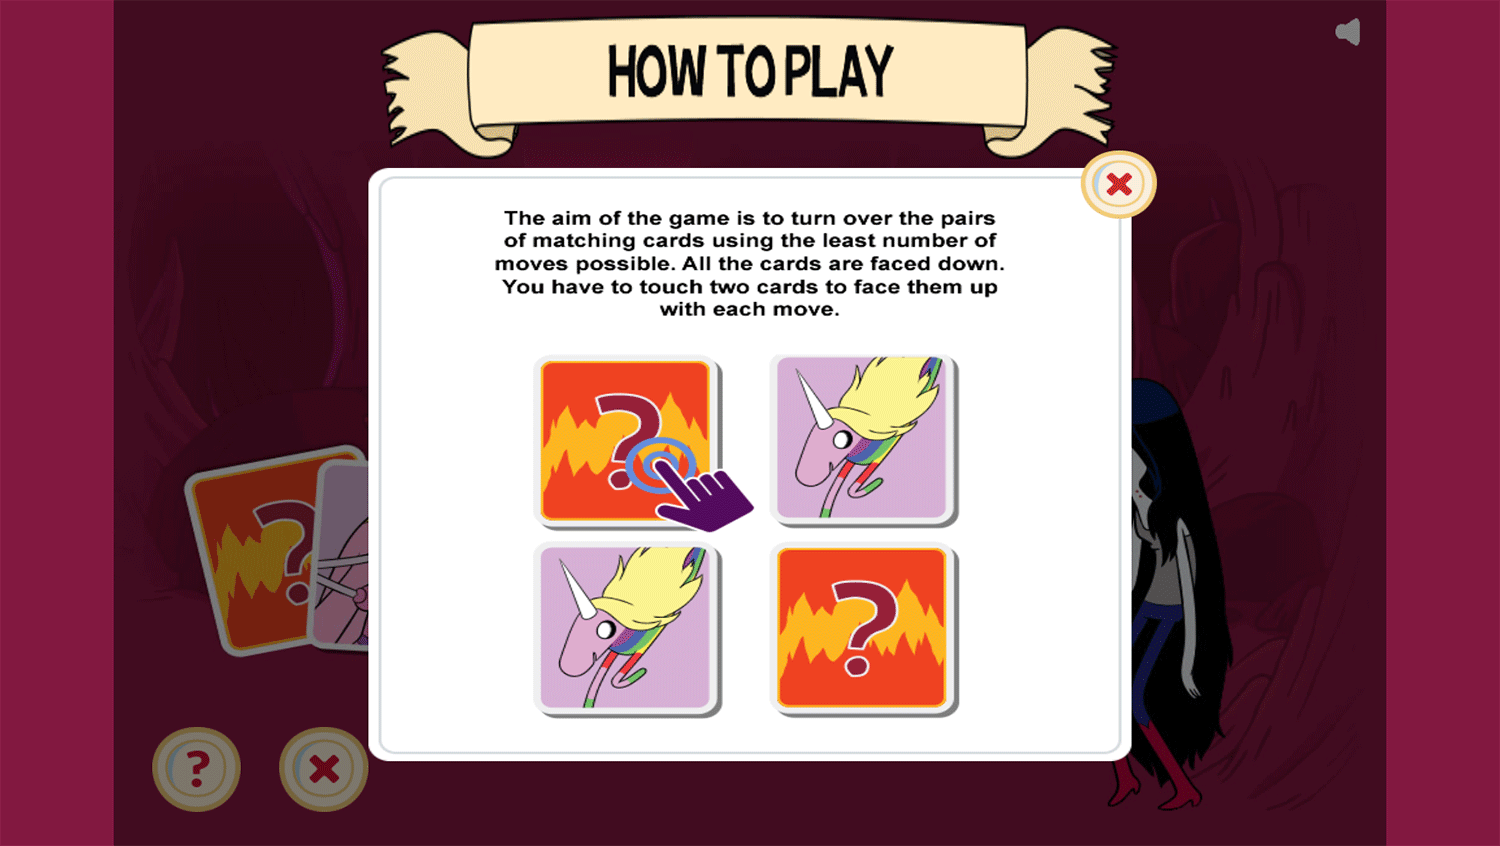 Adventure Time Fangs for the Memories Game How To Play Screenshot.